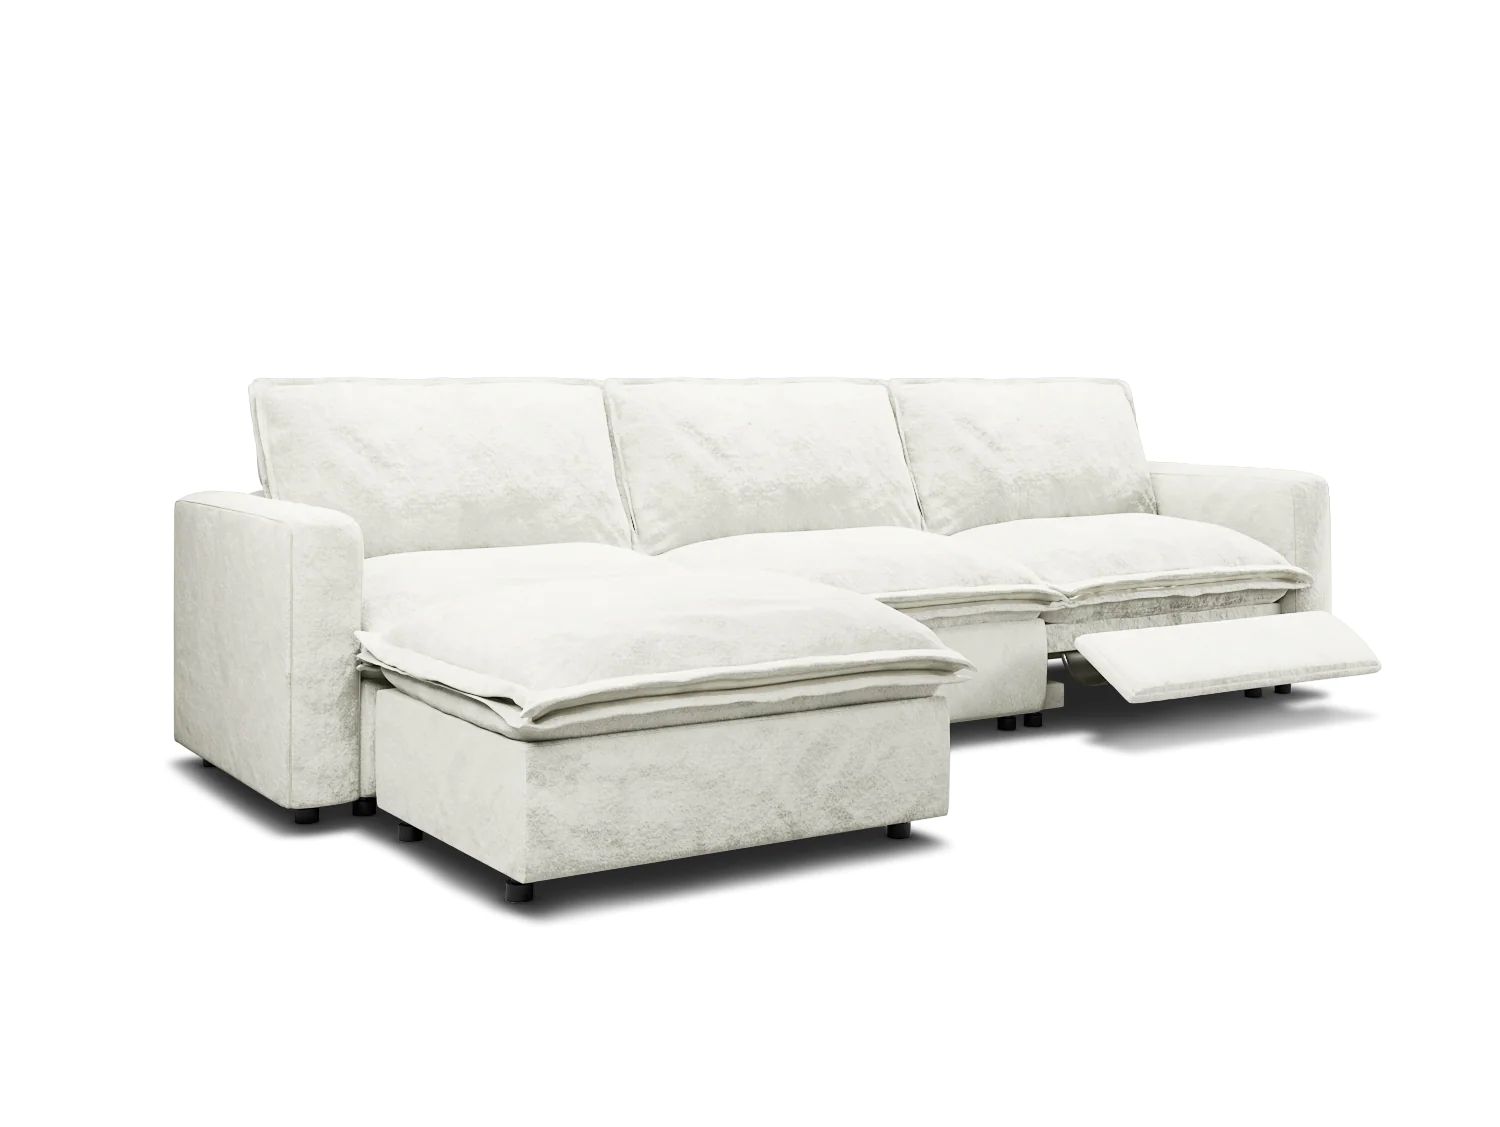 Homebody Couches: The Most Comfortable Reclining Modular Sofas | Homebody